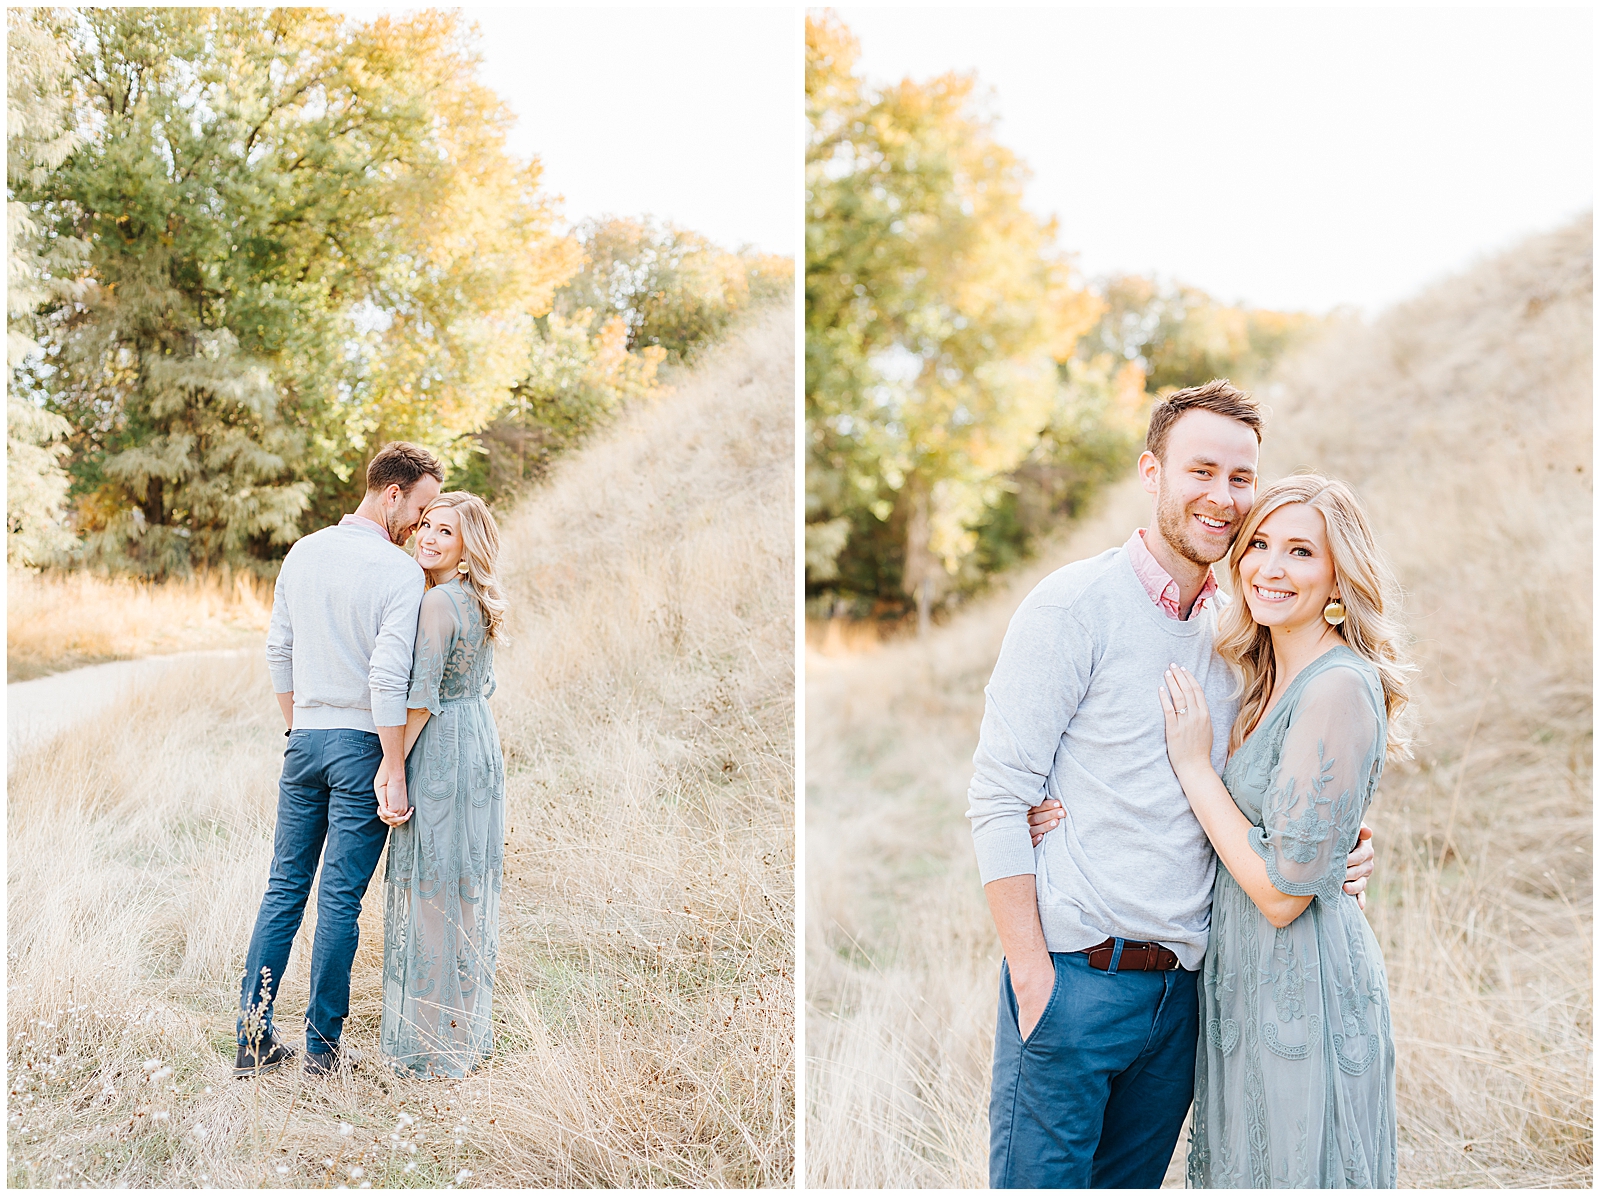 Dreamy Fall Engagement Session in the Boise Foothills